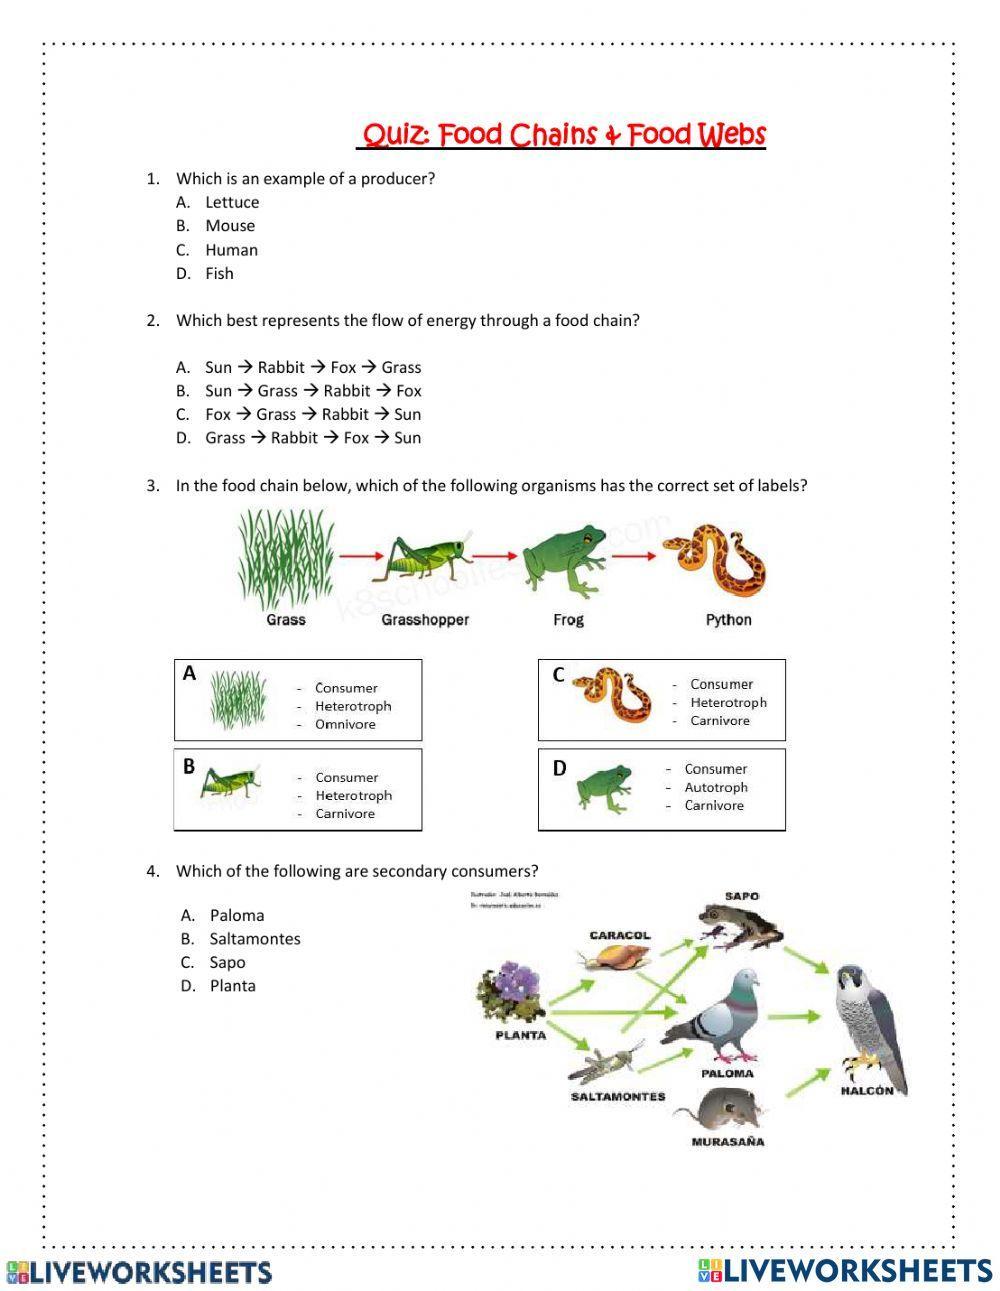 Quiz food chains and food webs